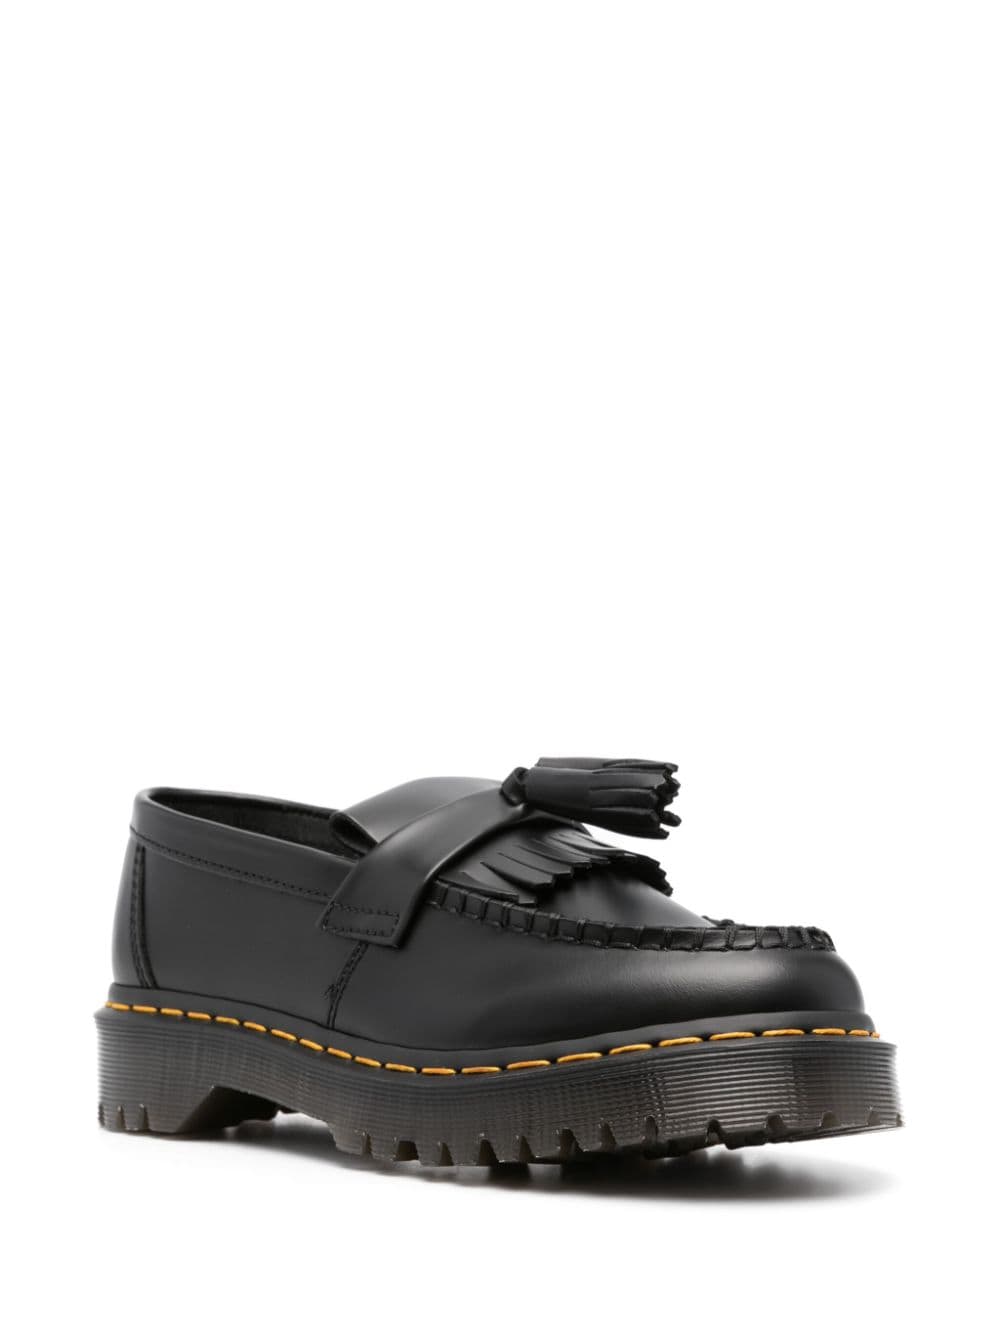 Adrian Bex leather loafers<BR/><BR/><BR/>